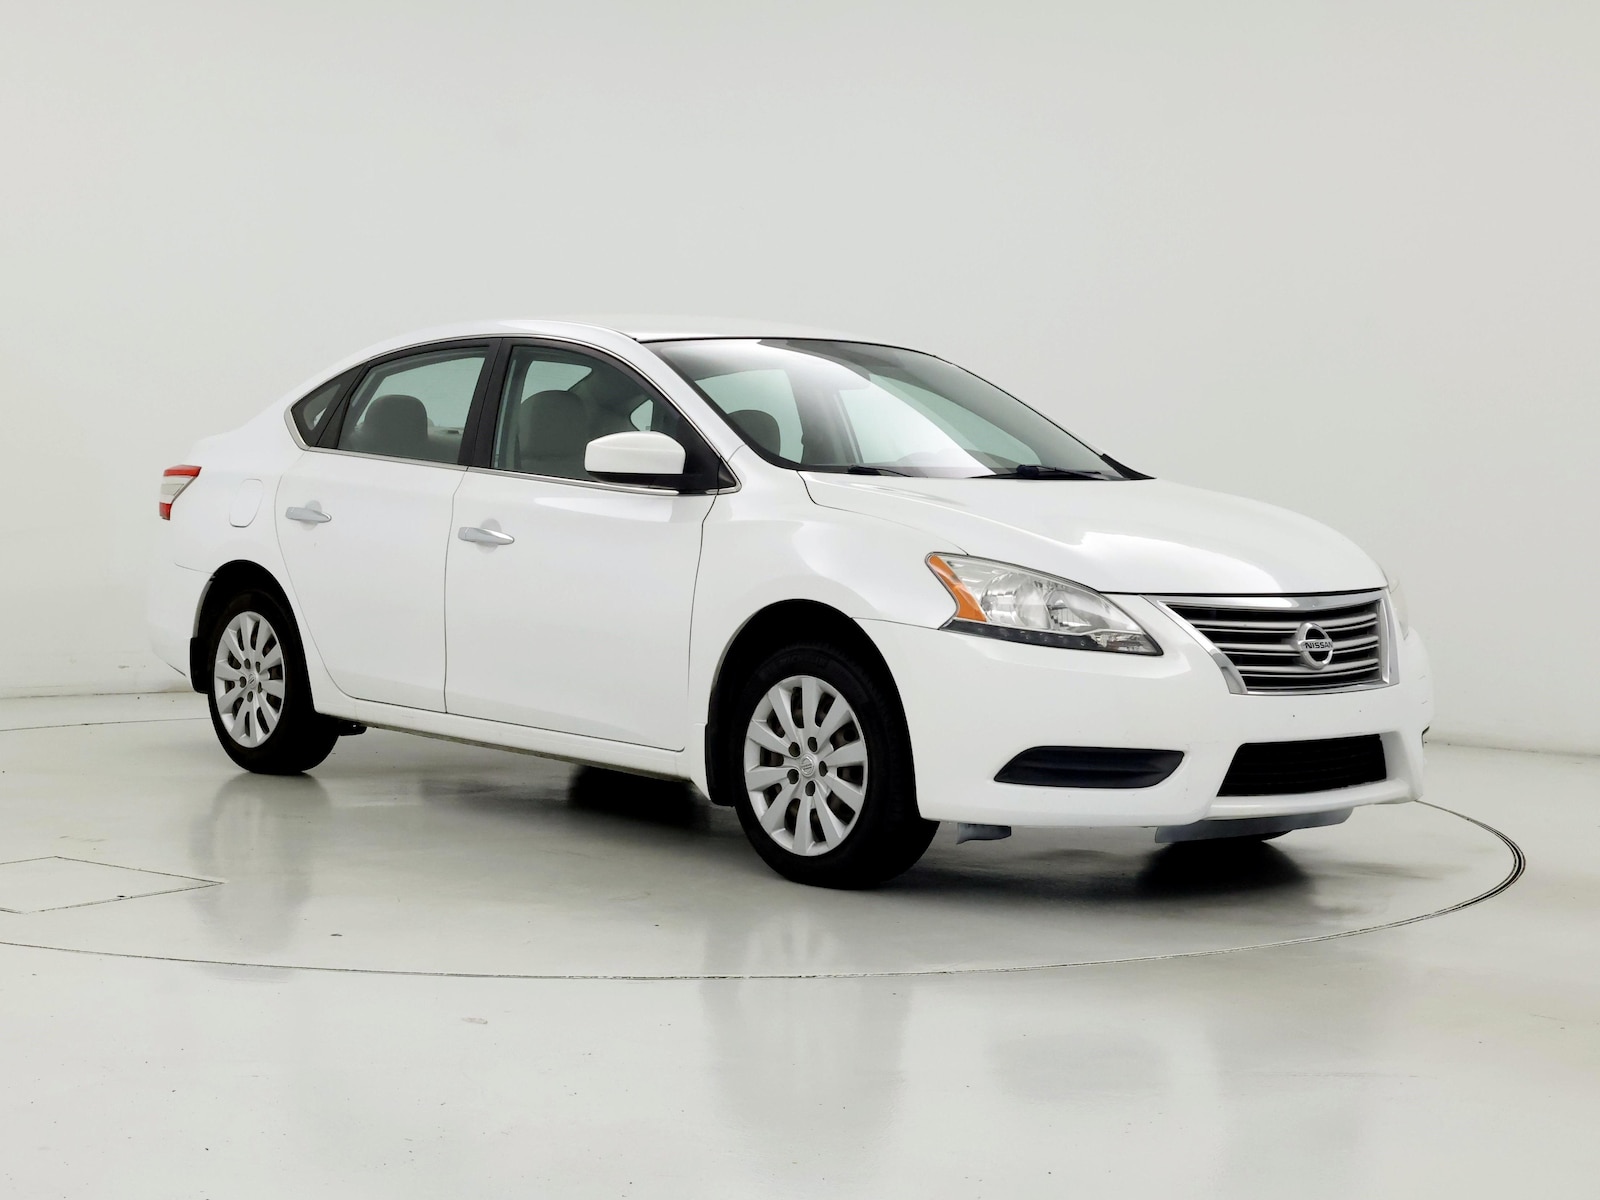 Used 2014 Nissan Sentra S with VIN 3N1AB7AP0EY275225 for sale in Spokane Valley, WA